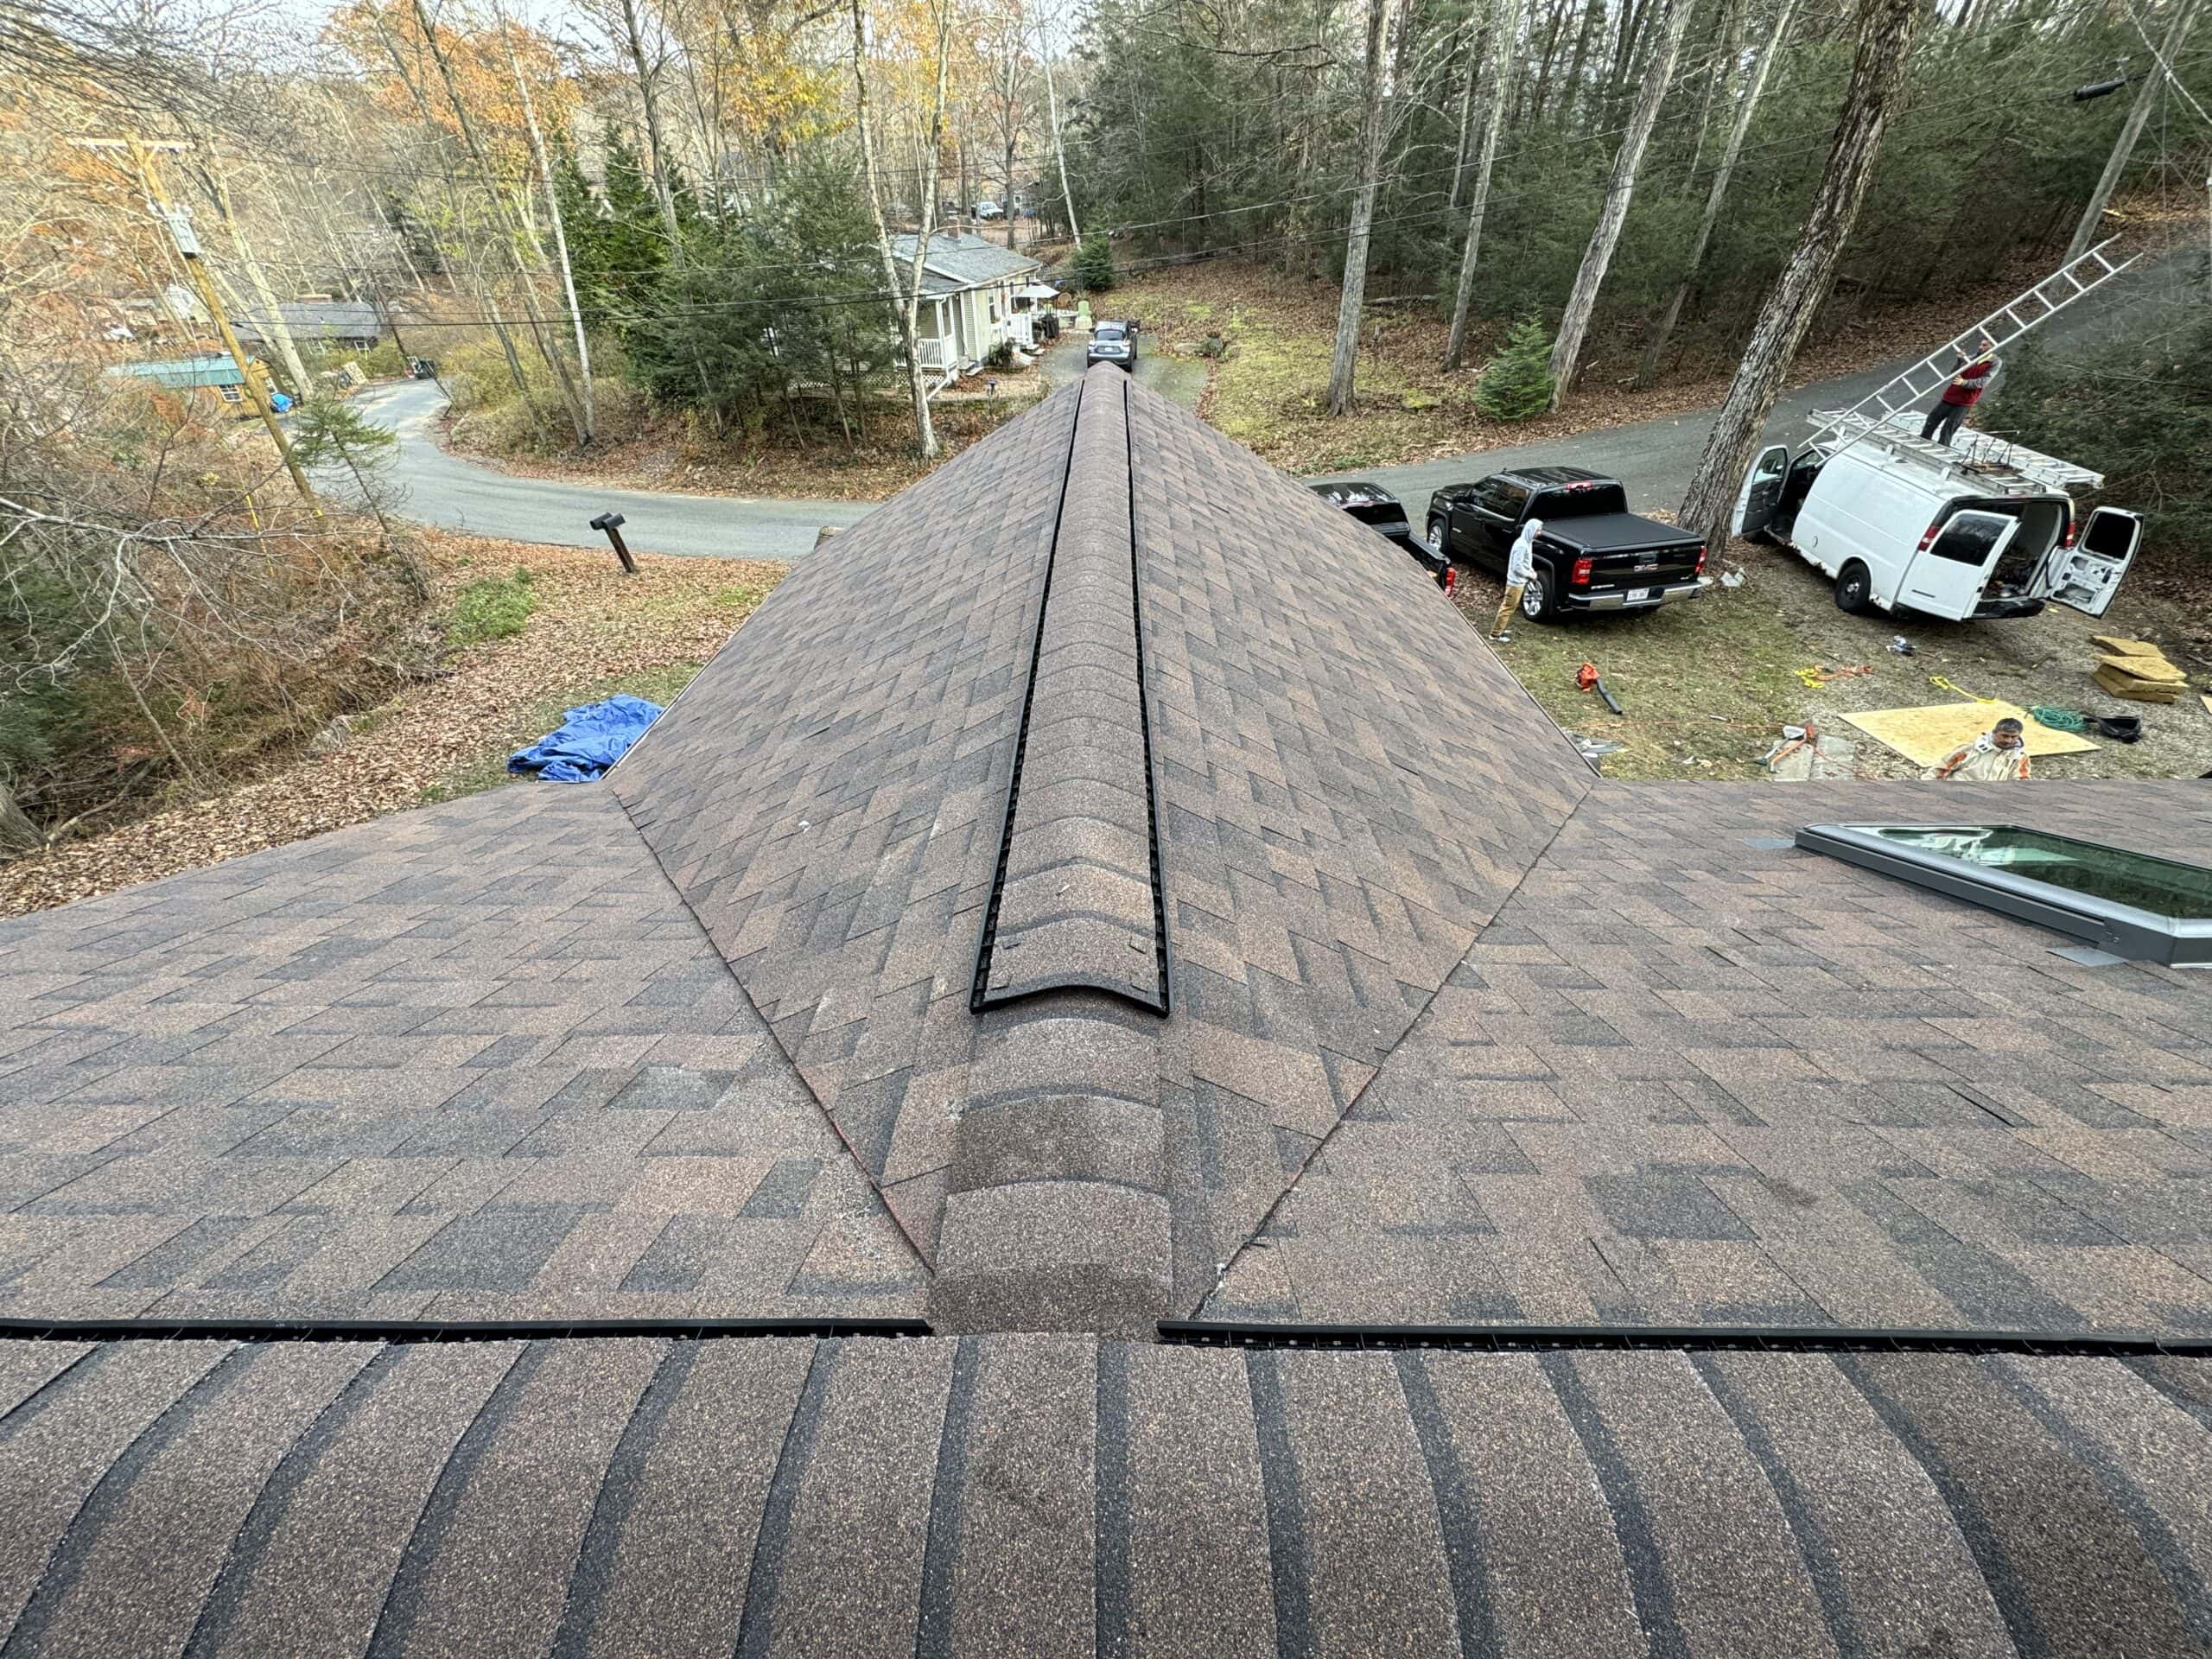 the roof of a house with shingles on it.